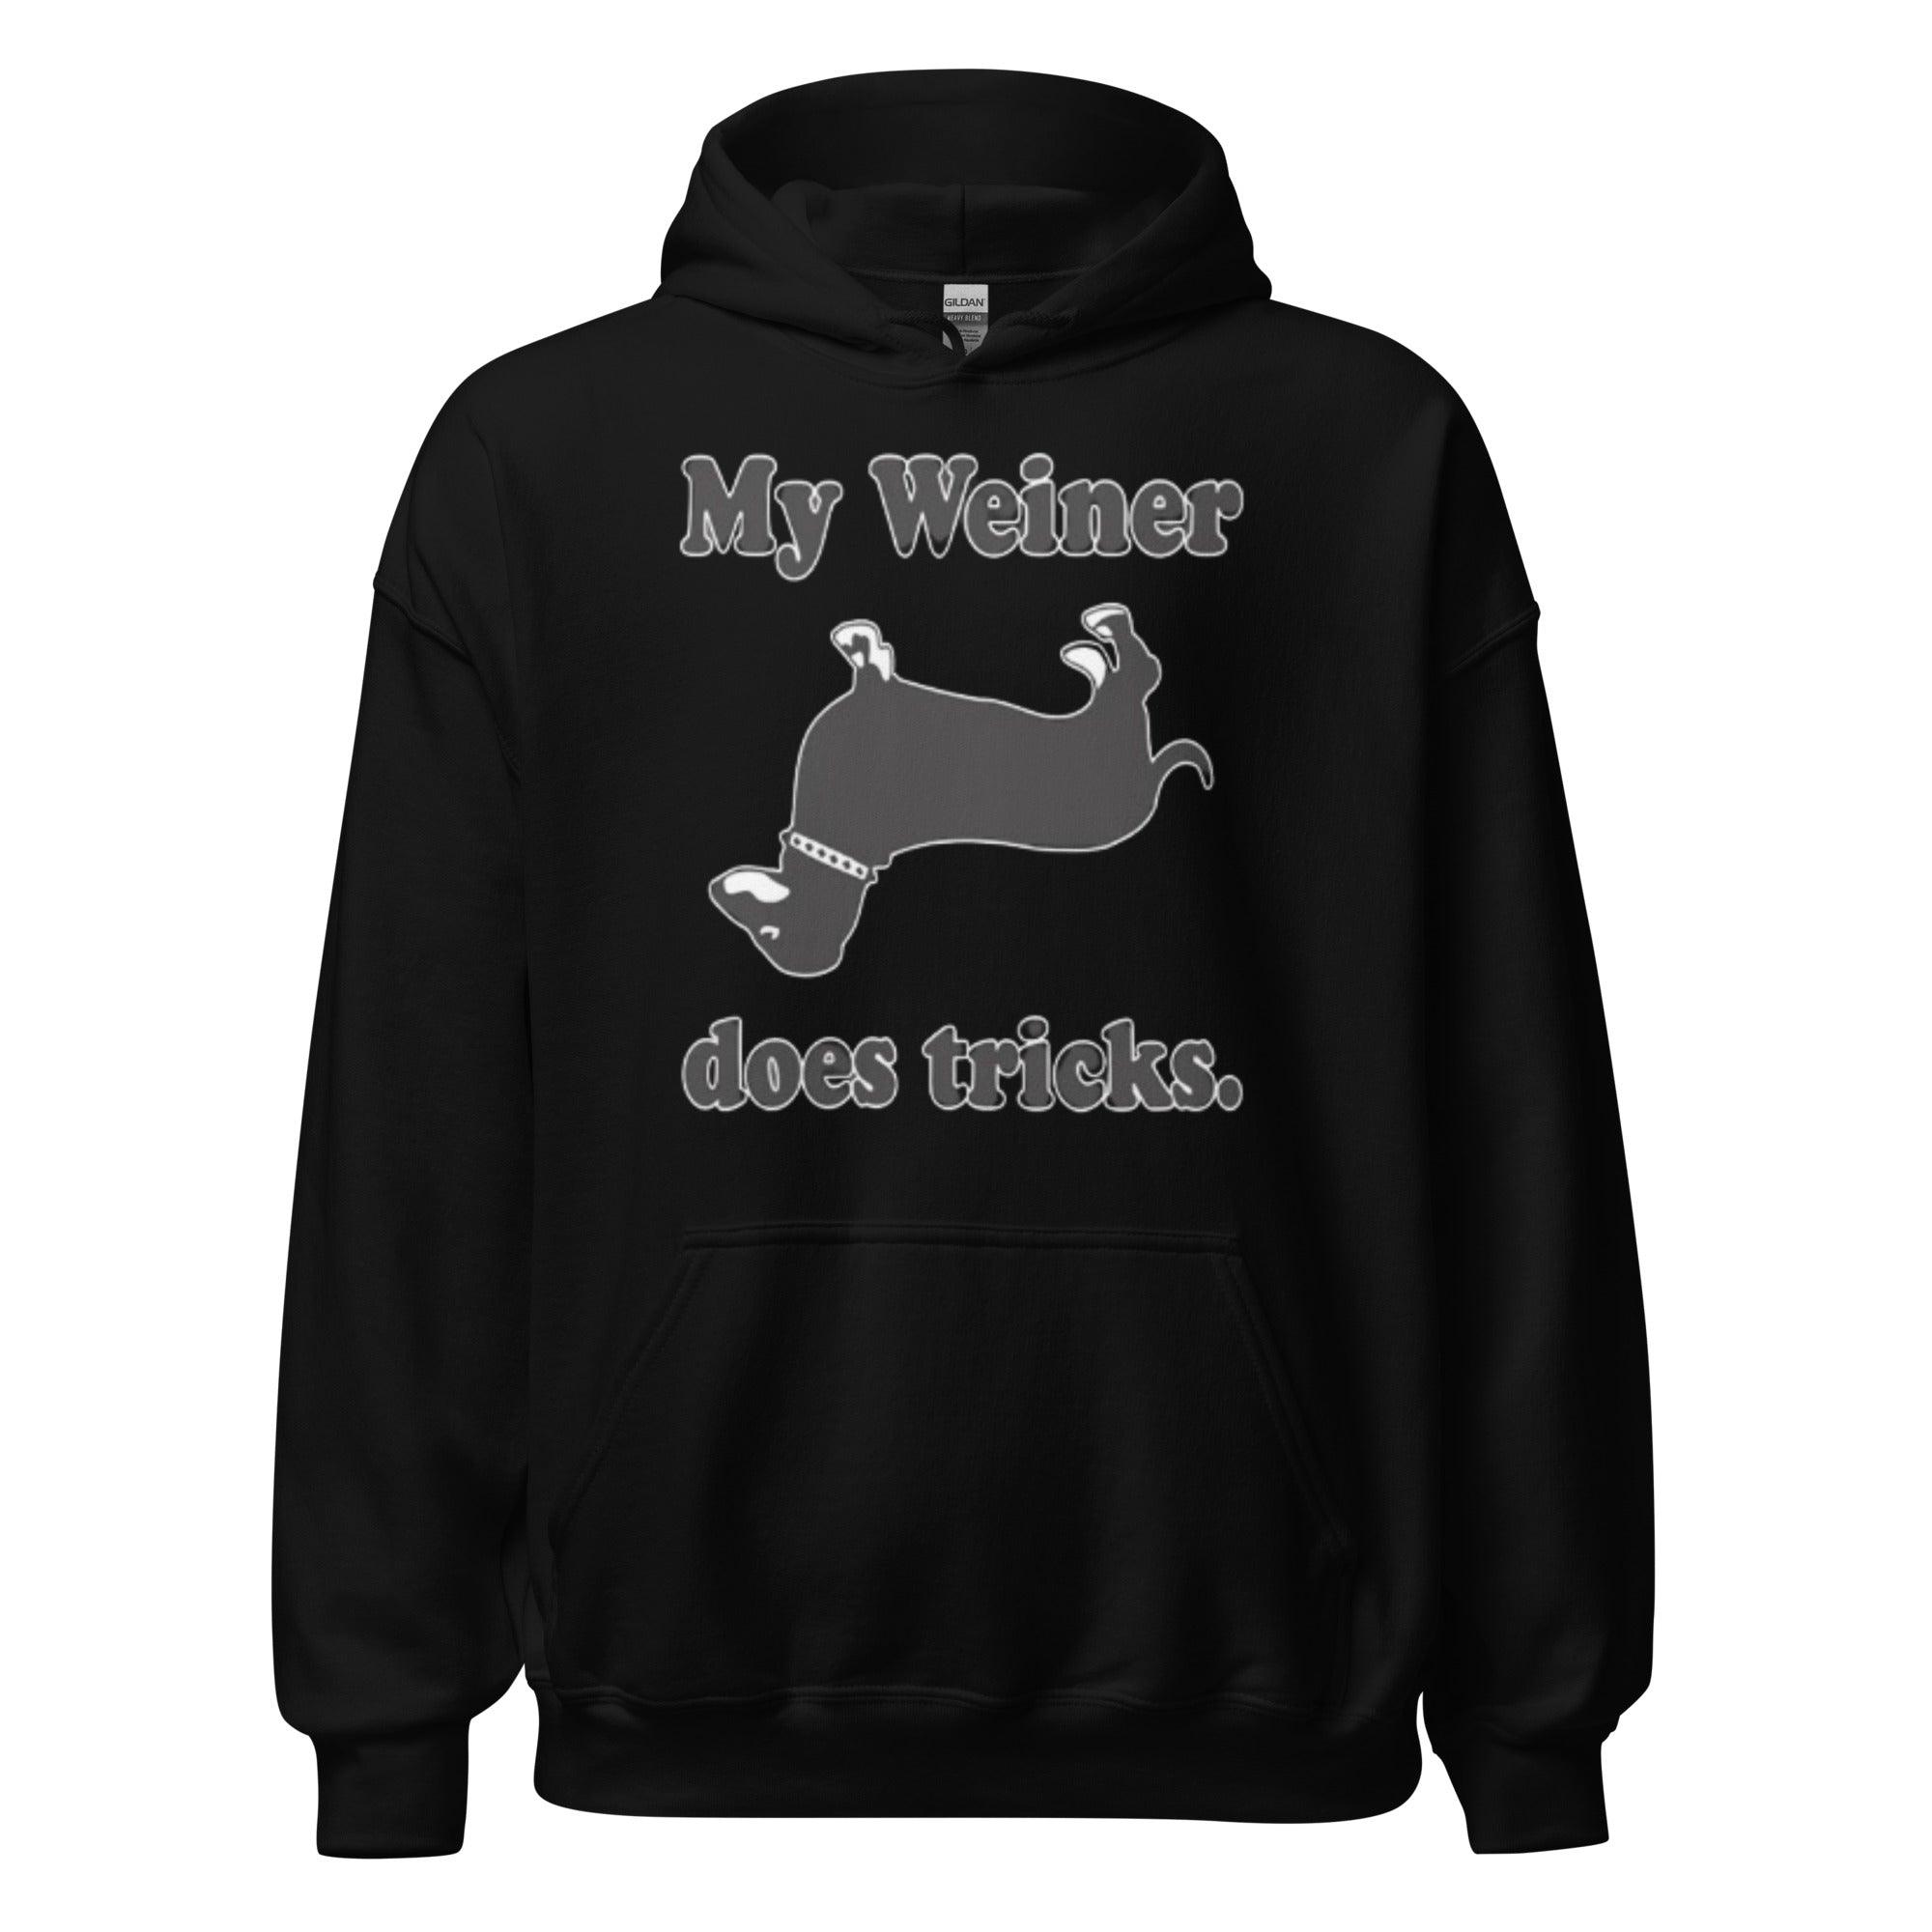 Humor Hoodie My Weiner Does Tricks Midweight Blended Cotton Unisex Pullover - TopKoalaTee